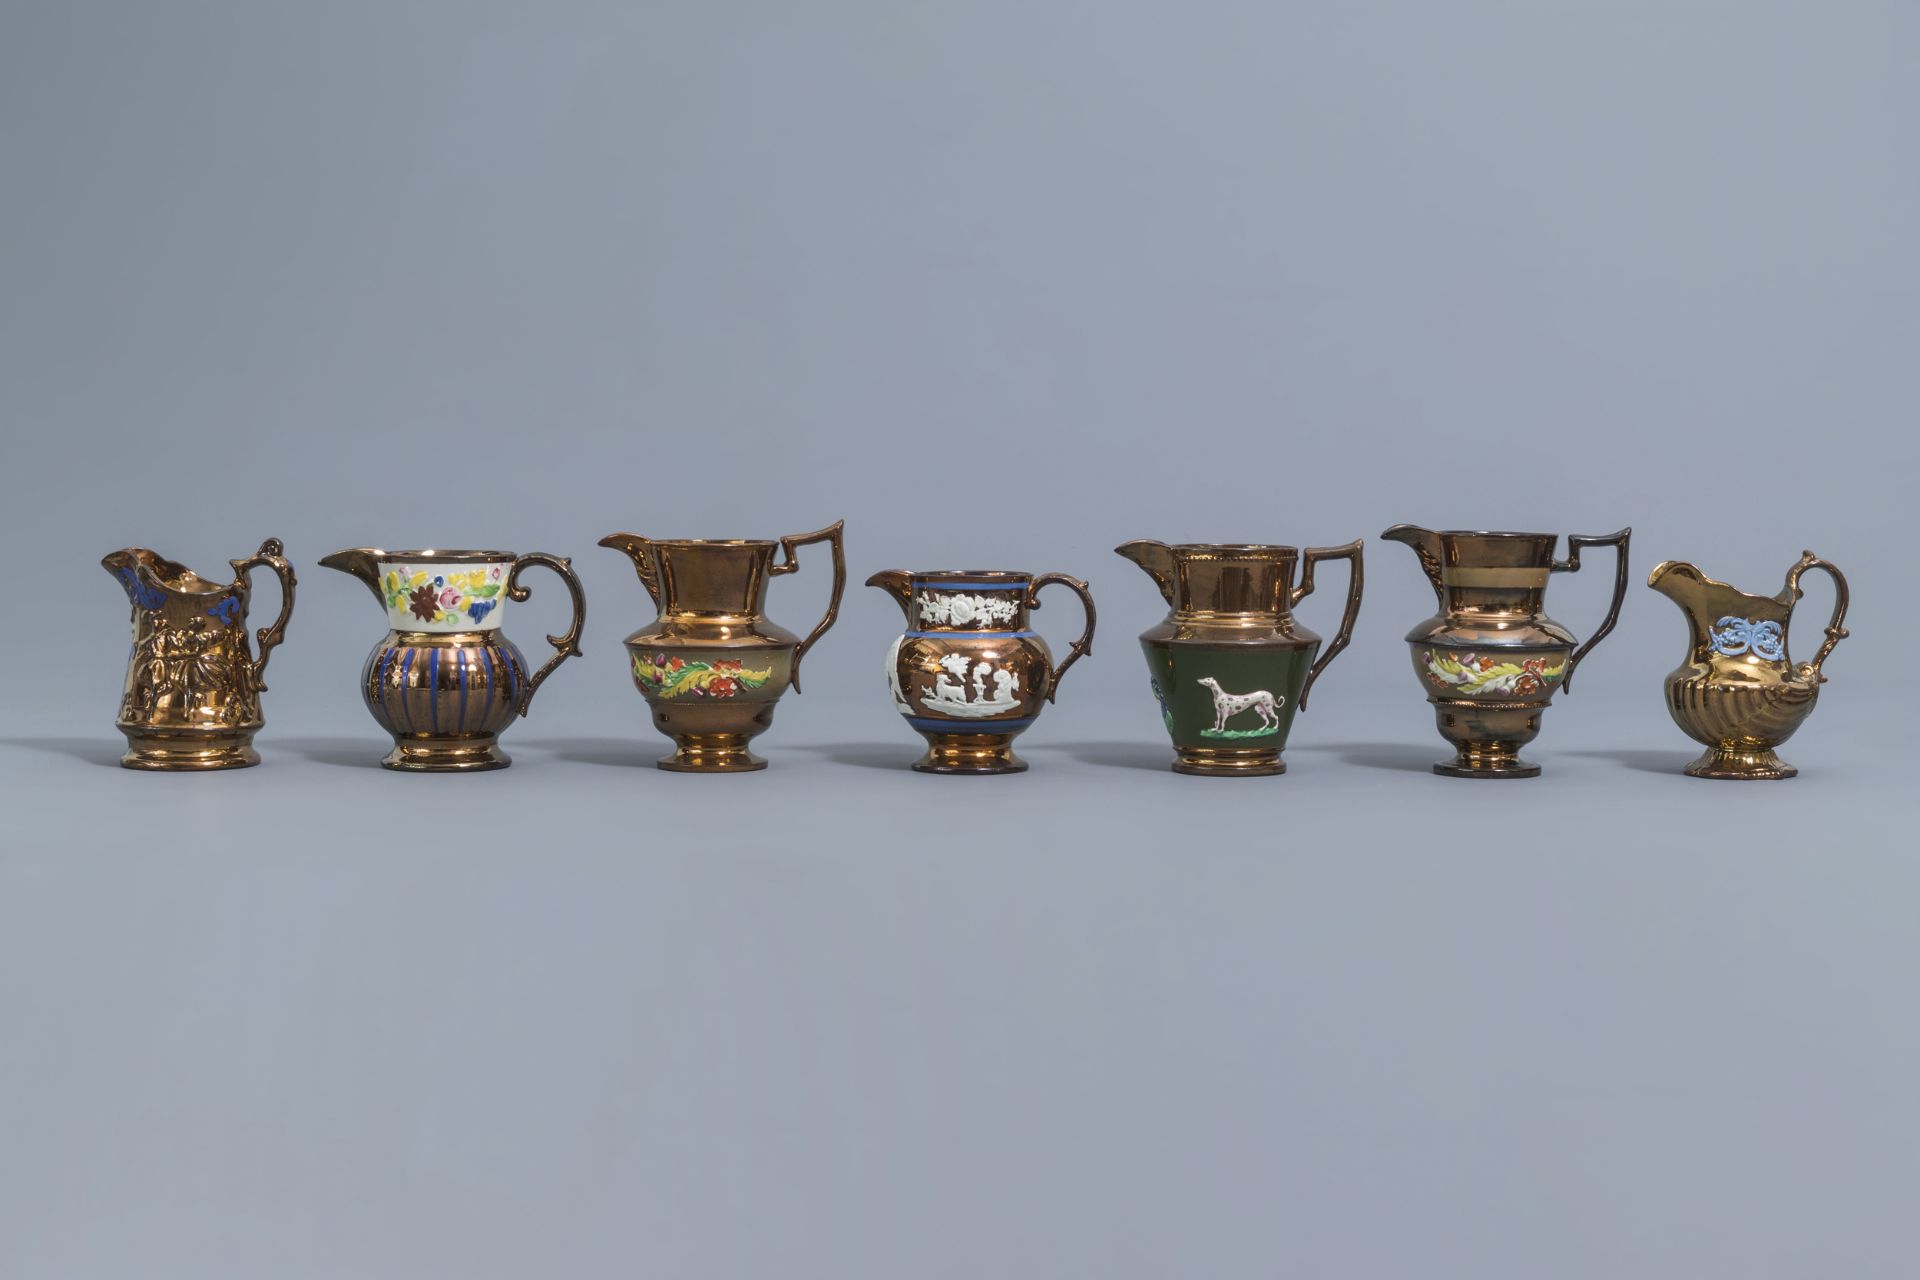 A varied collection of English lustreware items with relief design, 19th C. - Image 20 of 50